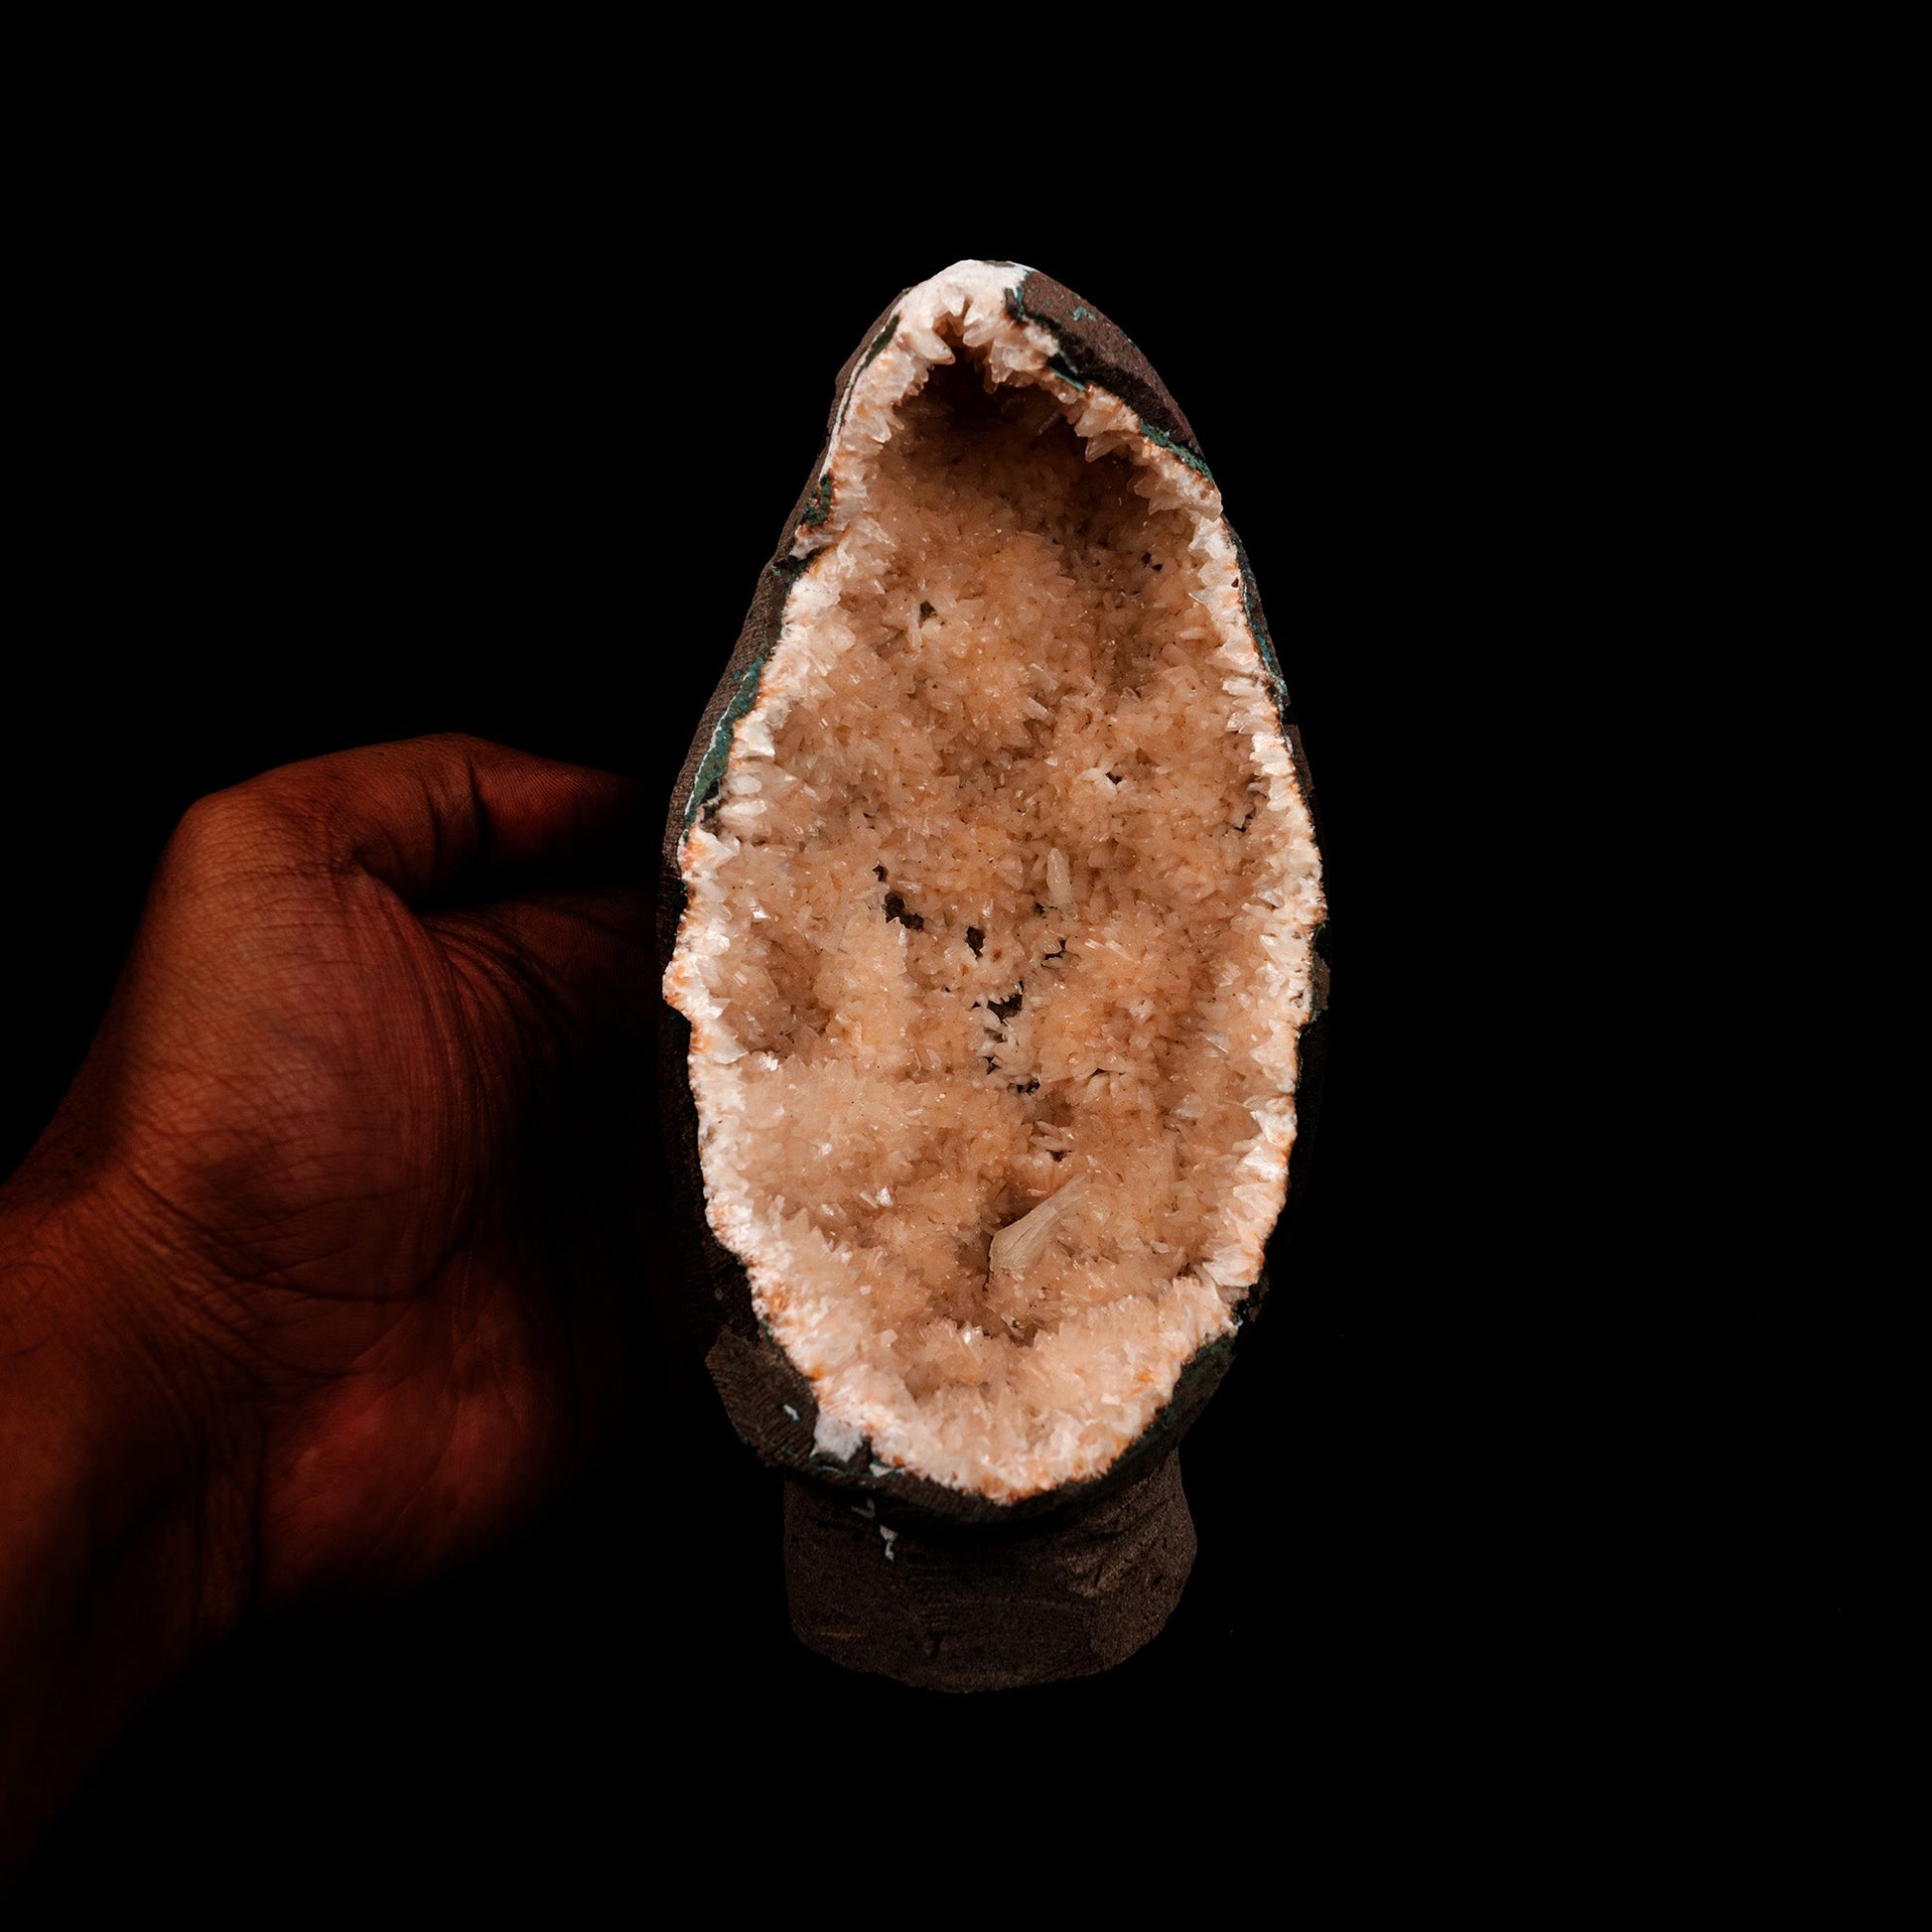 Helandite Geode Natural Mineral Specimen # B 5208  https://www.superbminerals.us/products/helandite-geode-natural-mineral-specimen-b-5208  Features: A nice aesthetic piece featuring a geode lined with lustrous, pink-orange Heulandite crystals. The crystals are well defined with a pearly, almost glassy luster. This piece sparkles. Excellent condition. Primary Mineral(s): HeulanditeSecondary Mineral(s): N/AMatrix: N/A 7 Inch x 3.5 InchWeight : 782 